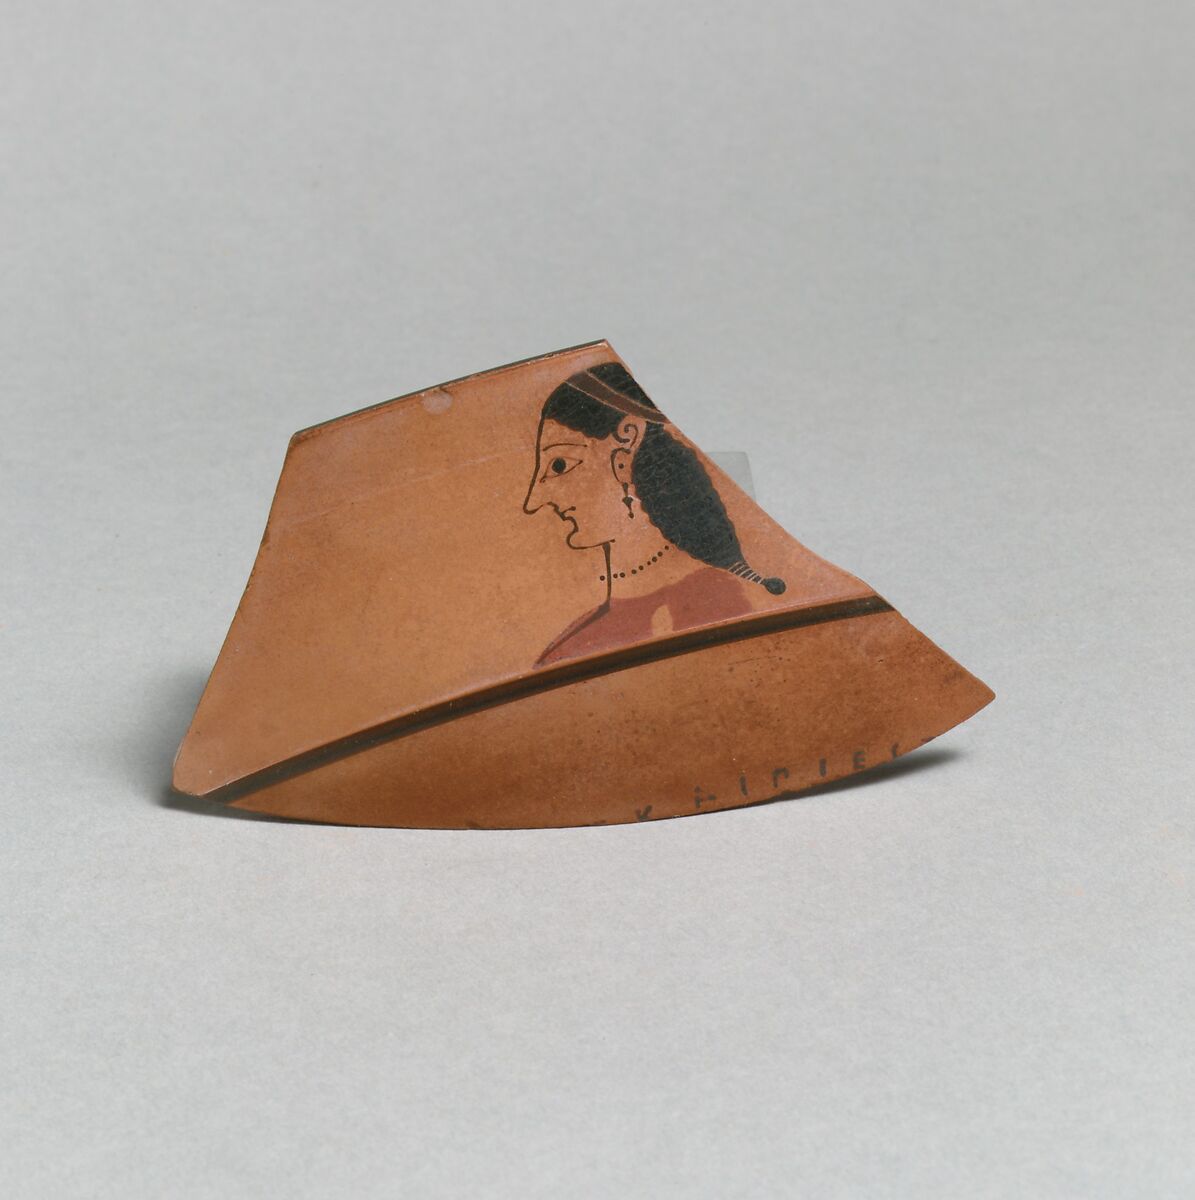 Fragment of a terracotta kylix: lip-cup (drinking cup), Attributed to Sakonides, Terracotta, Greek, Attic 